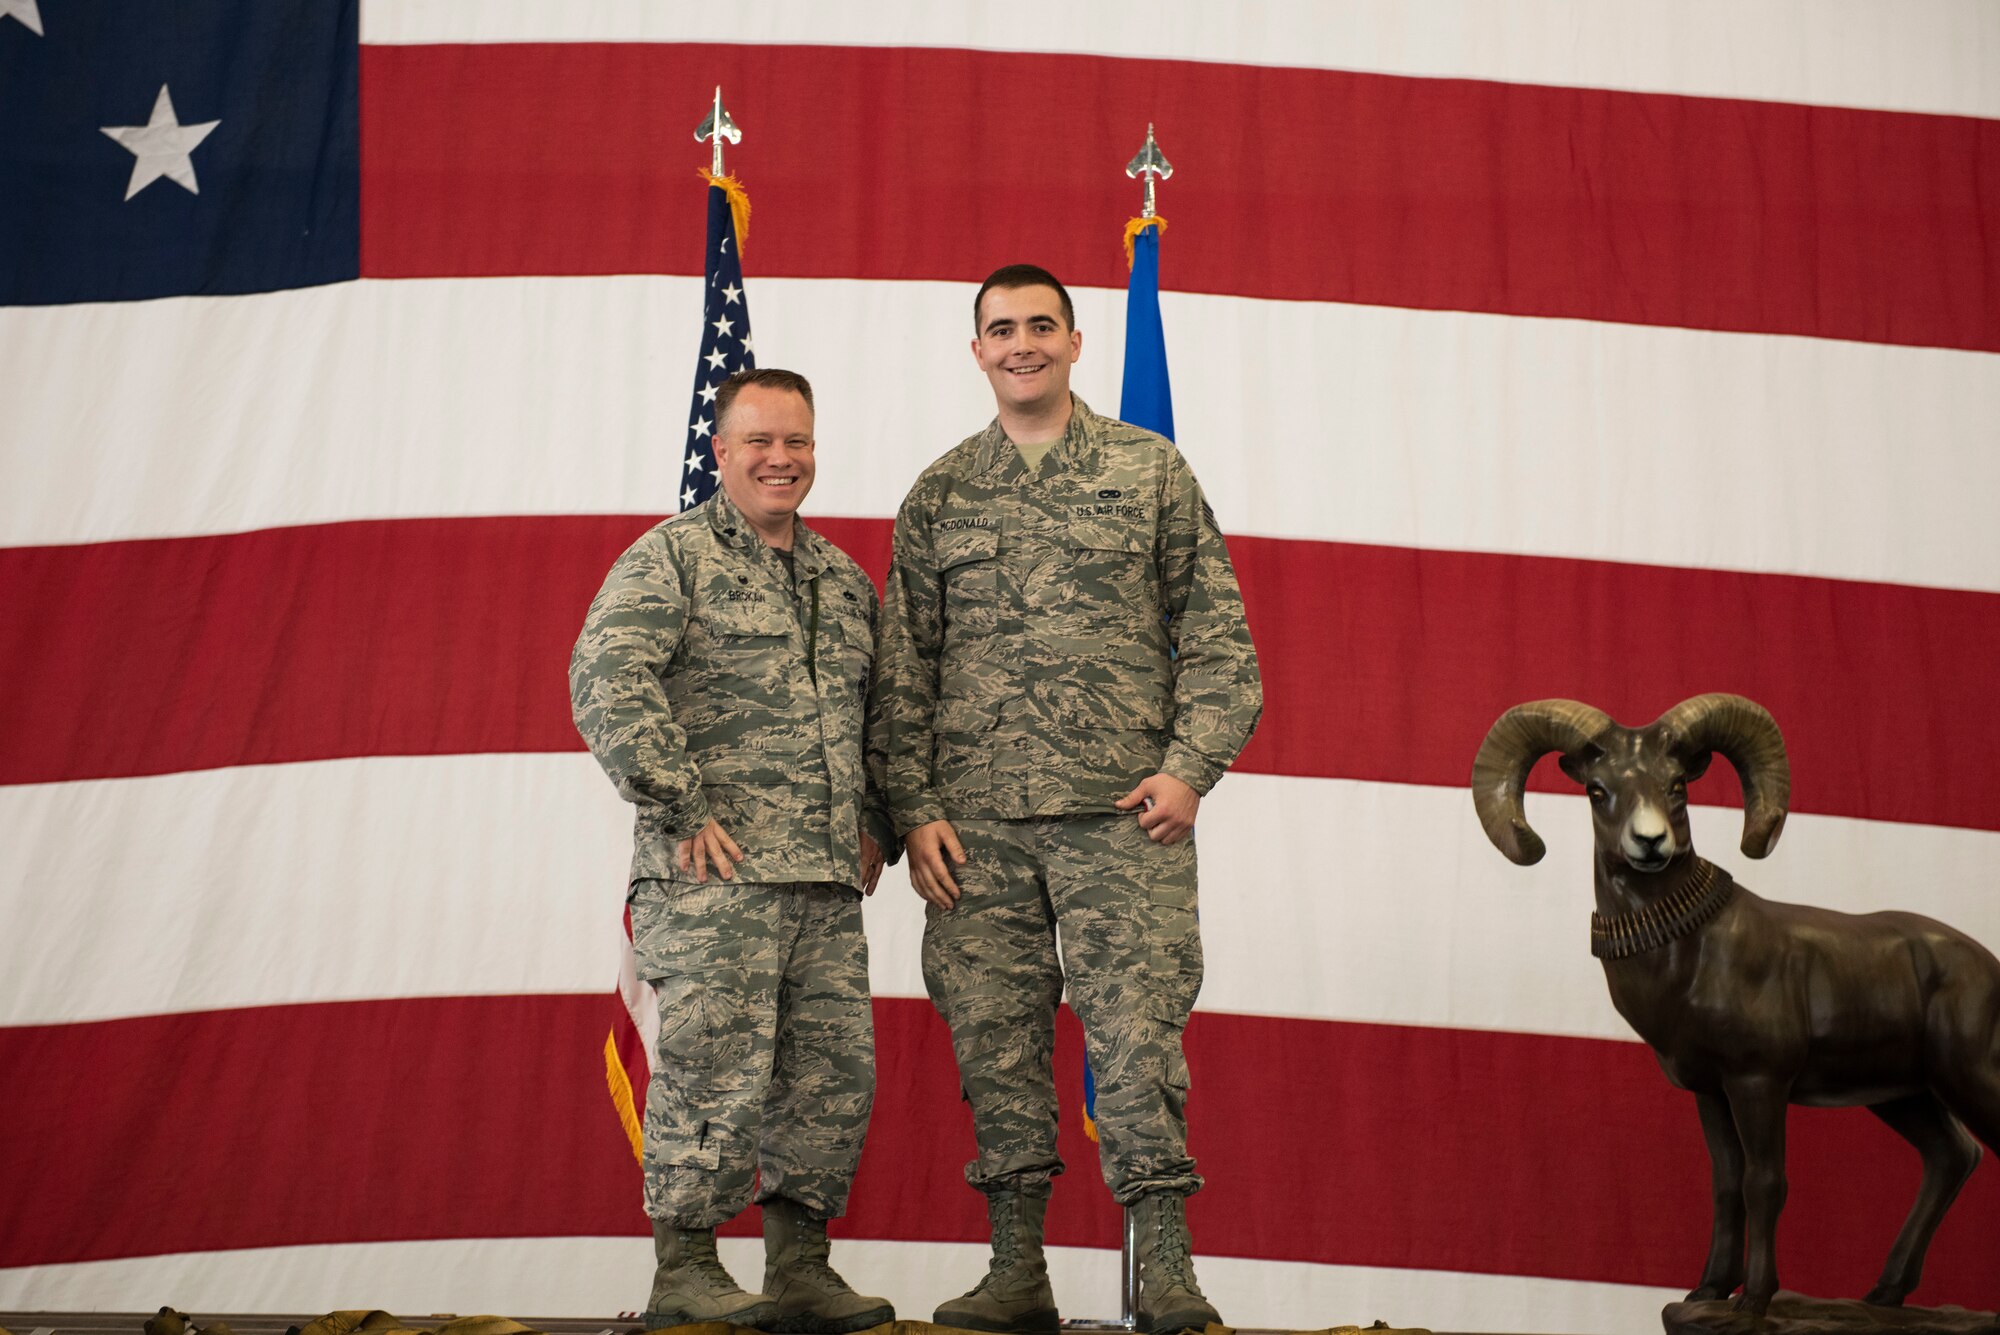 Lt. Col. Timothy Brokaw, 757th Aircraft Maintenance Squadron (AMXS) commander, and Staff Sgt. William McDonald, 757th AMXS dedicated crew chief (DCC), pose for a photo during a DCC ceremony, at Nellis Air Force Base, Nevada, Aug. 16, 2019. McDonald is one of the 34 aircraft maintainers selected for the position of DCC, who manages and supervises all maintenance performed on an assigned aircraft. (U.S. Air Force photo by Senior Airman Miranda A. Loera)